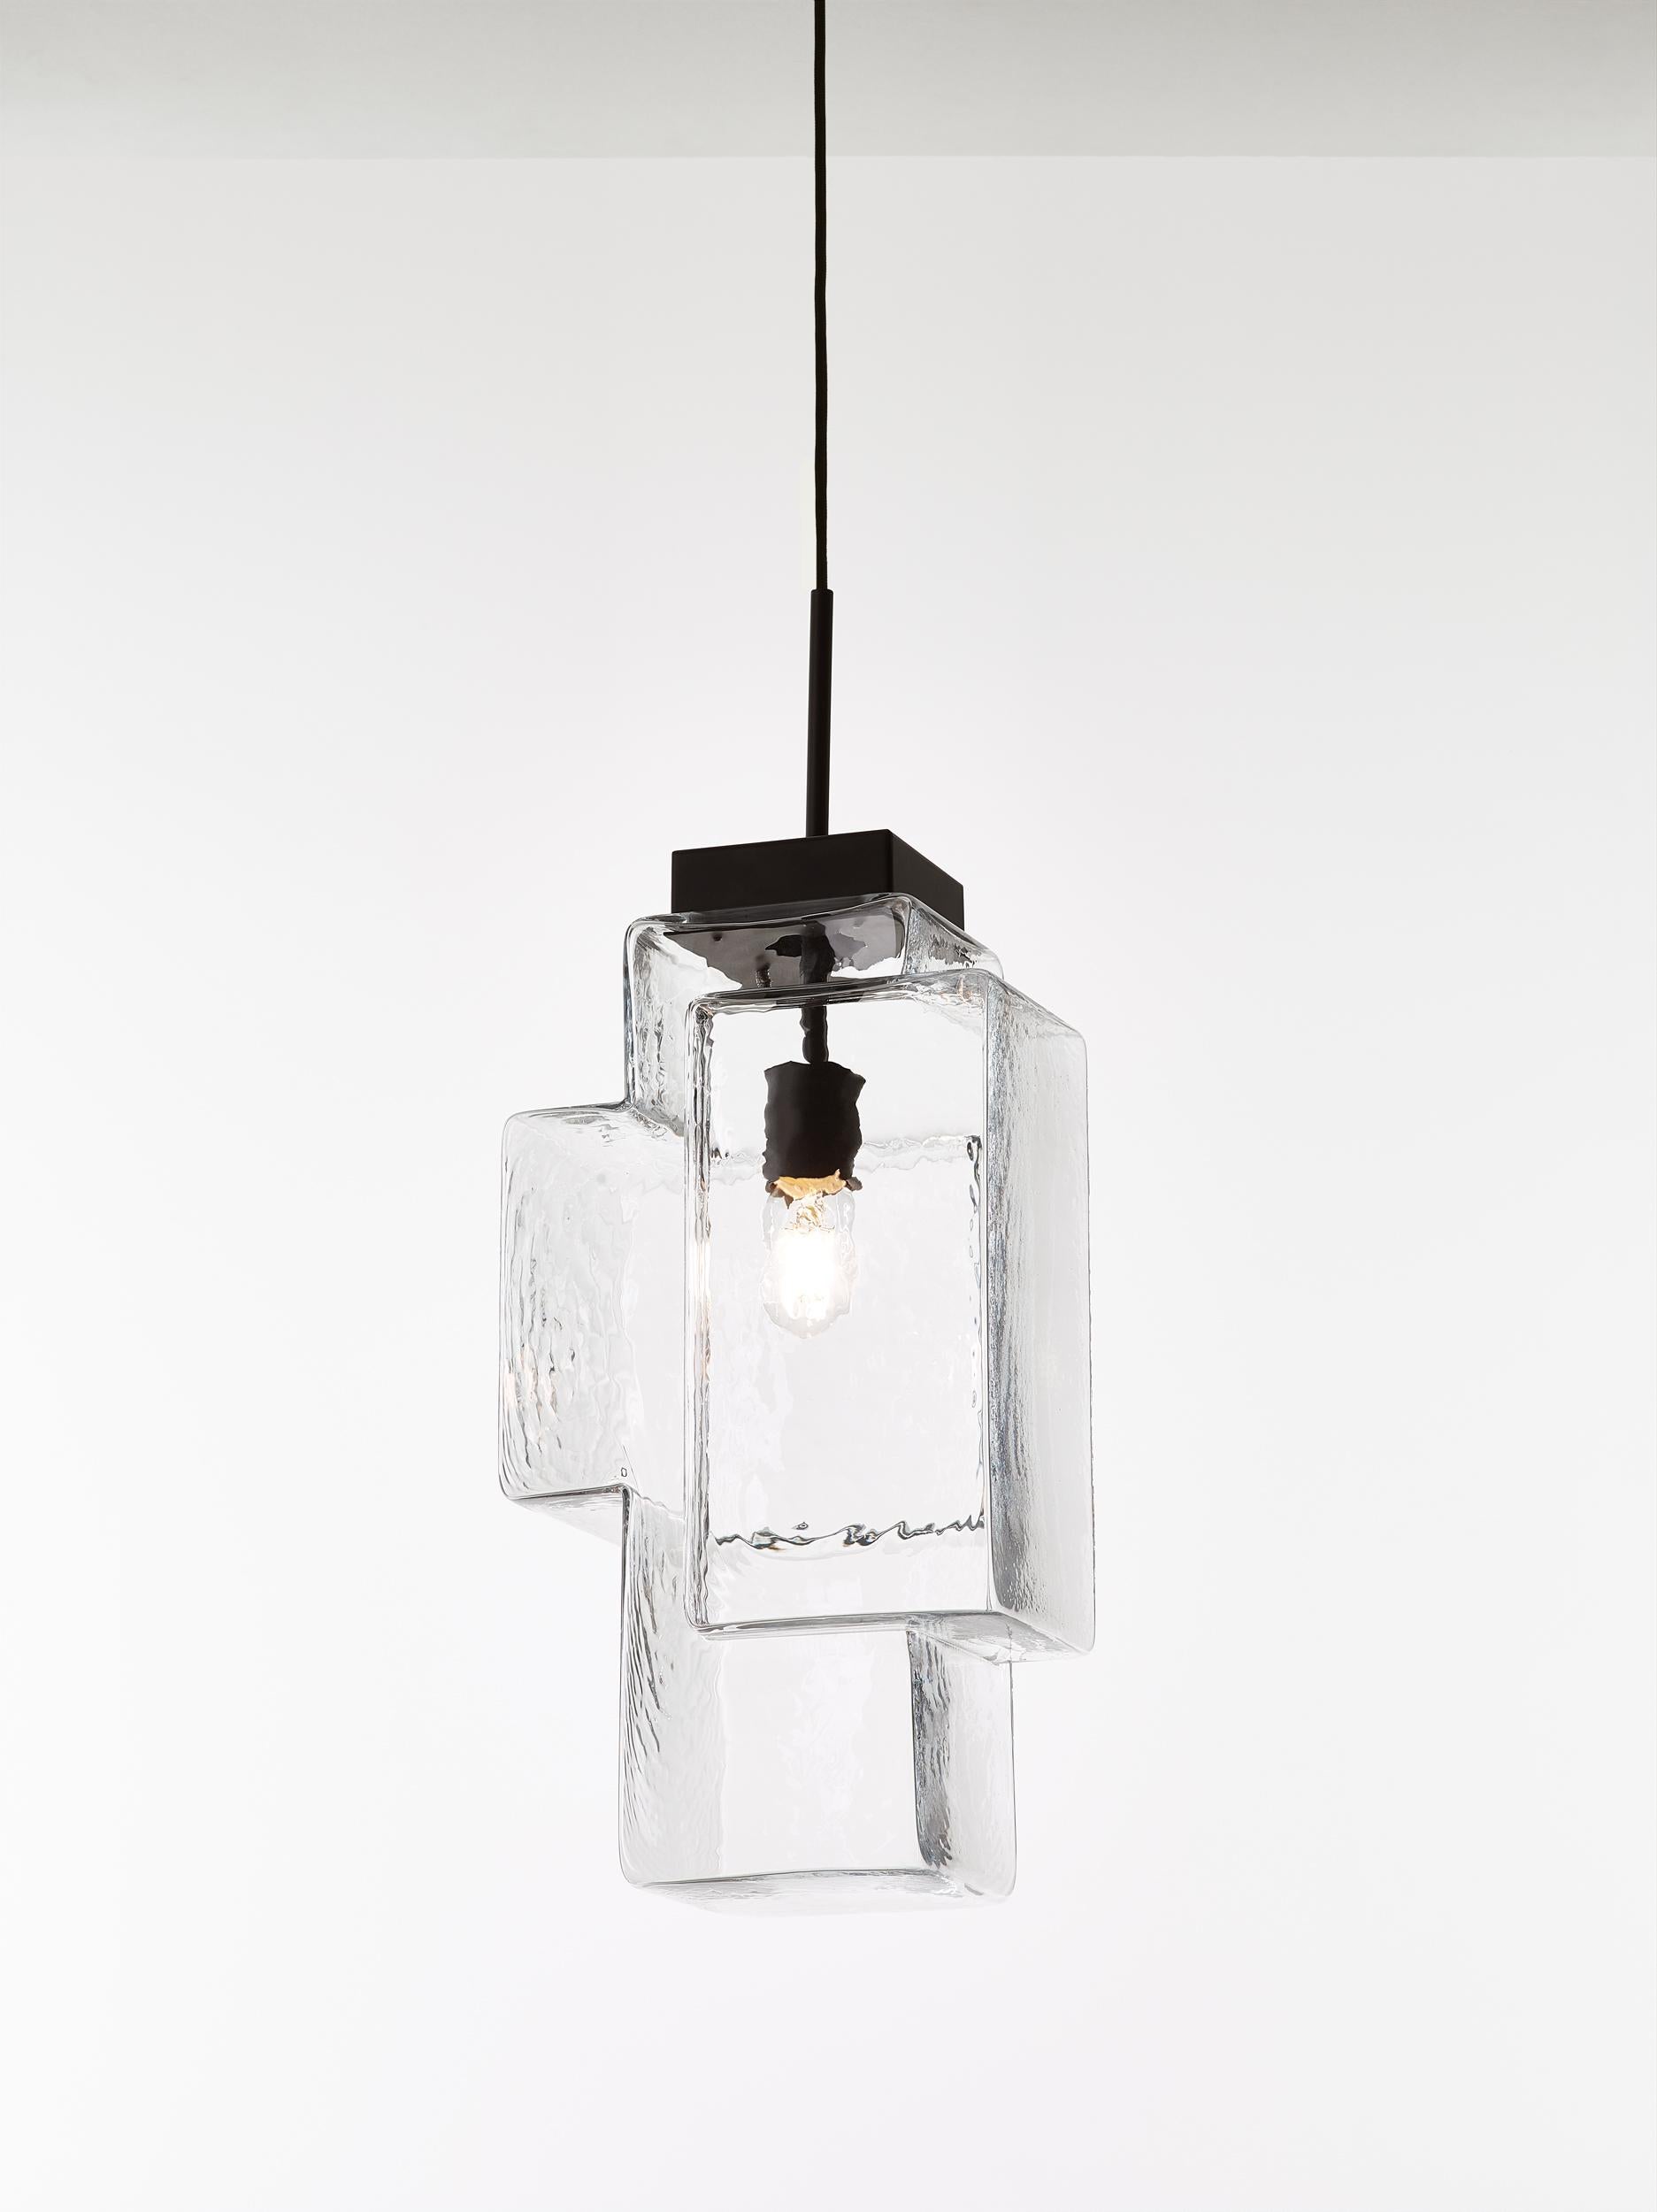 Crystal clear Tetris pendant light by Dechem Studio.
Dimensions: W 30 x D 23 x H 200 cm
Materials: metal, glass.
Also available: different colours available.

In this complex lighting fixture, strict geometric and architectural lines contrast